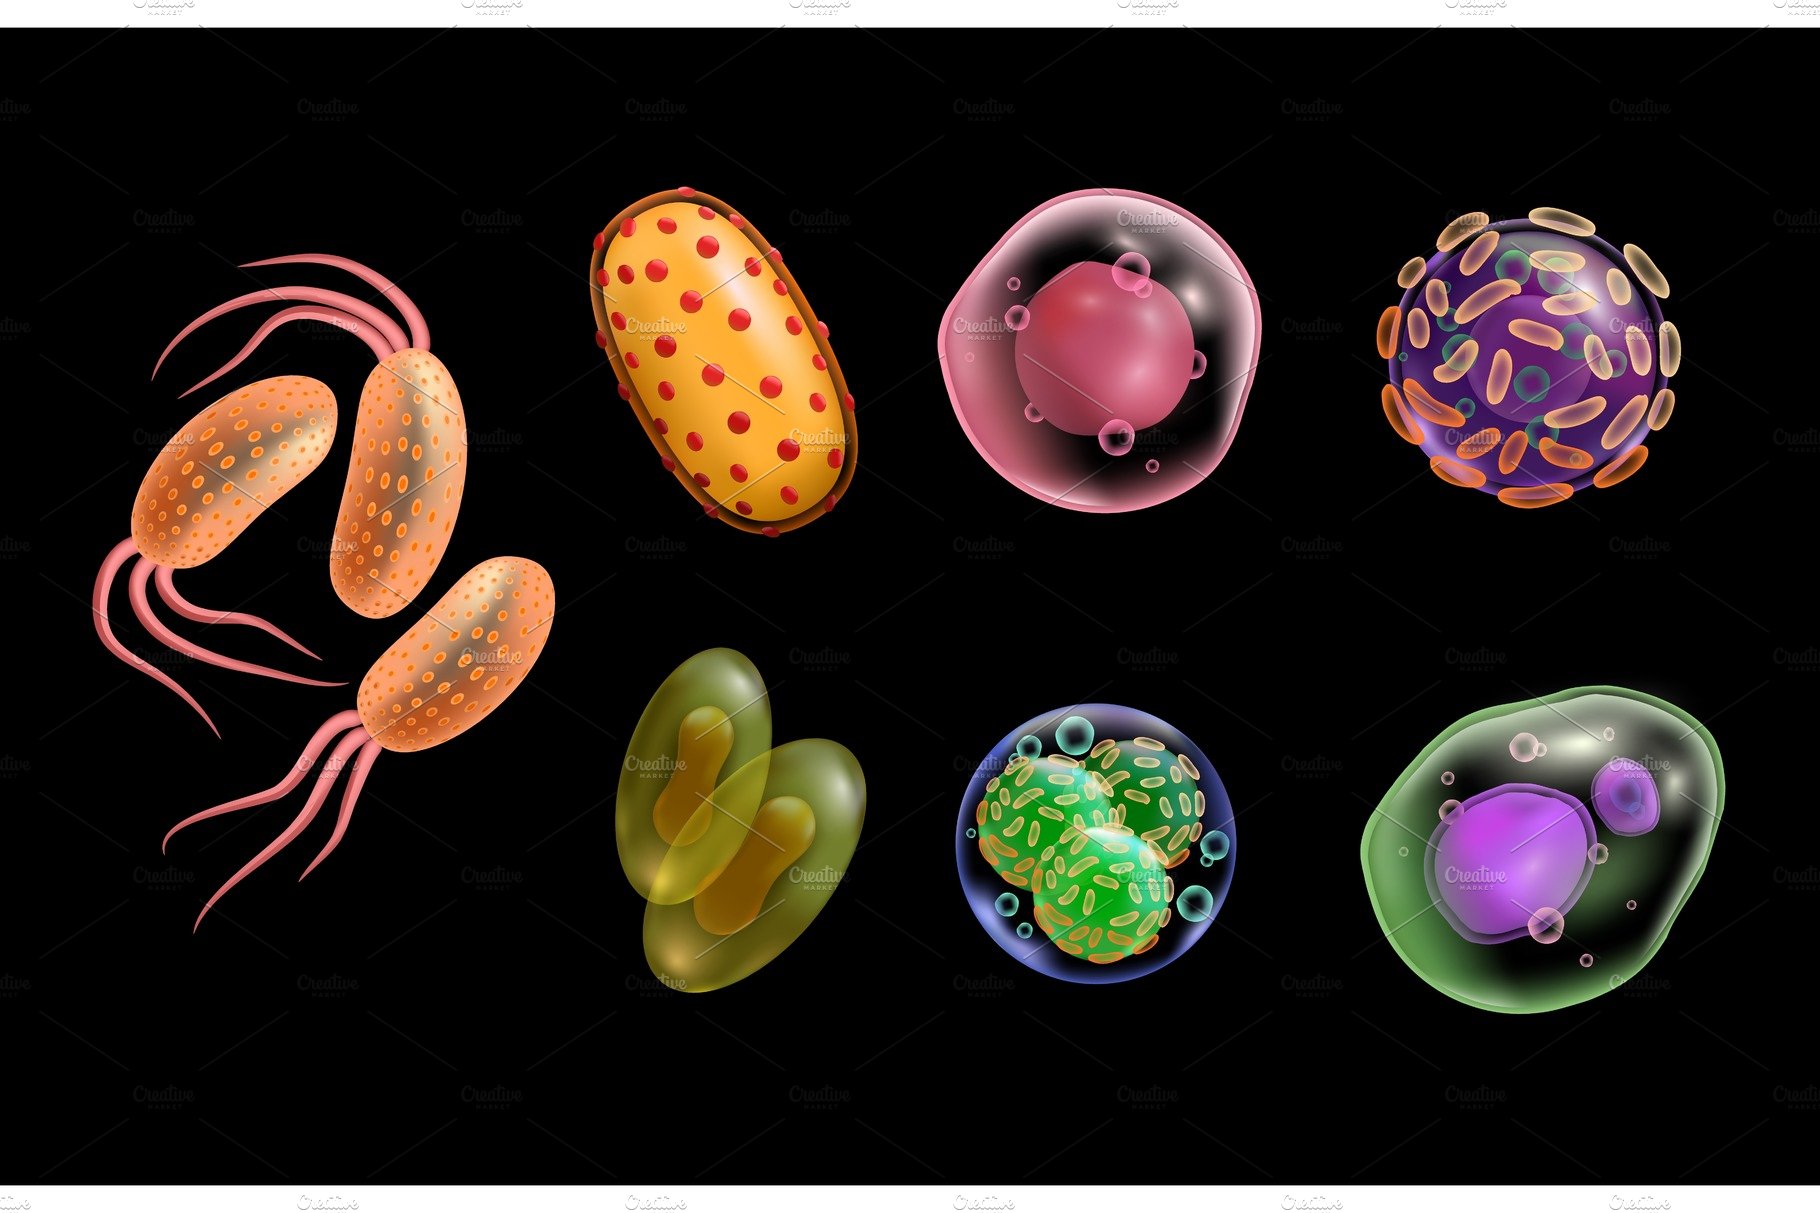 Viruses and bacteria realistic cells cover image.